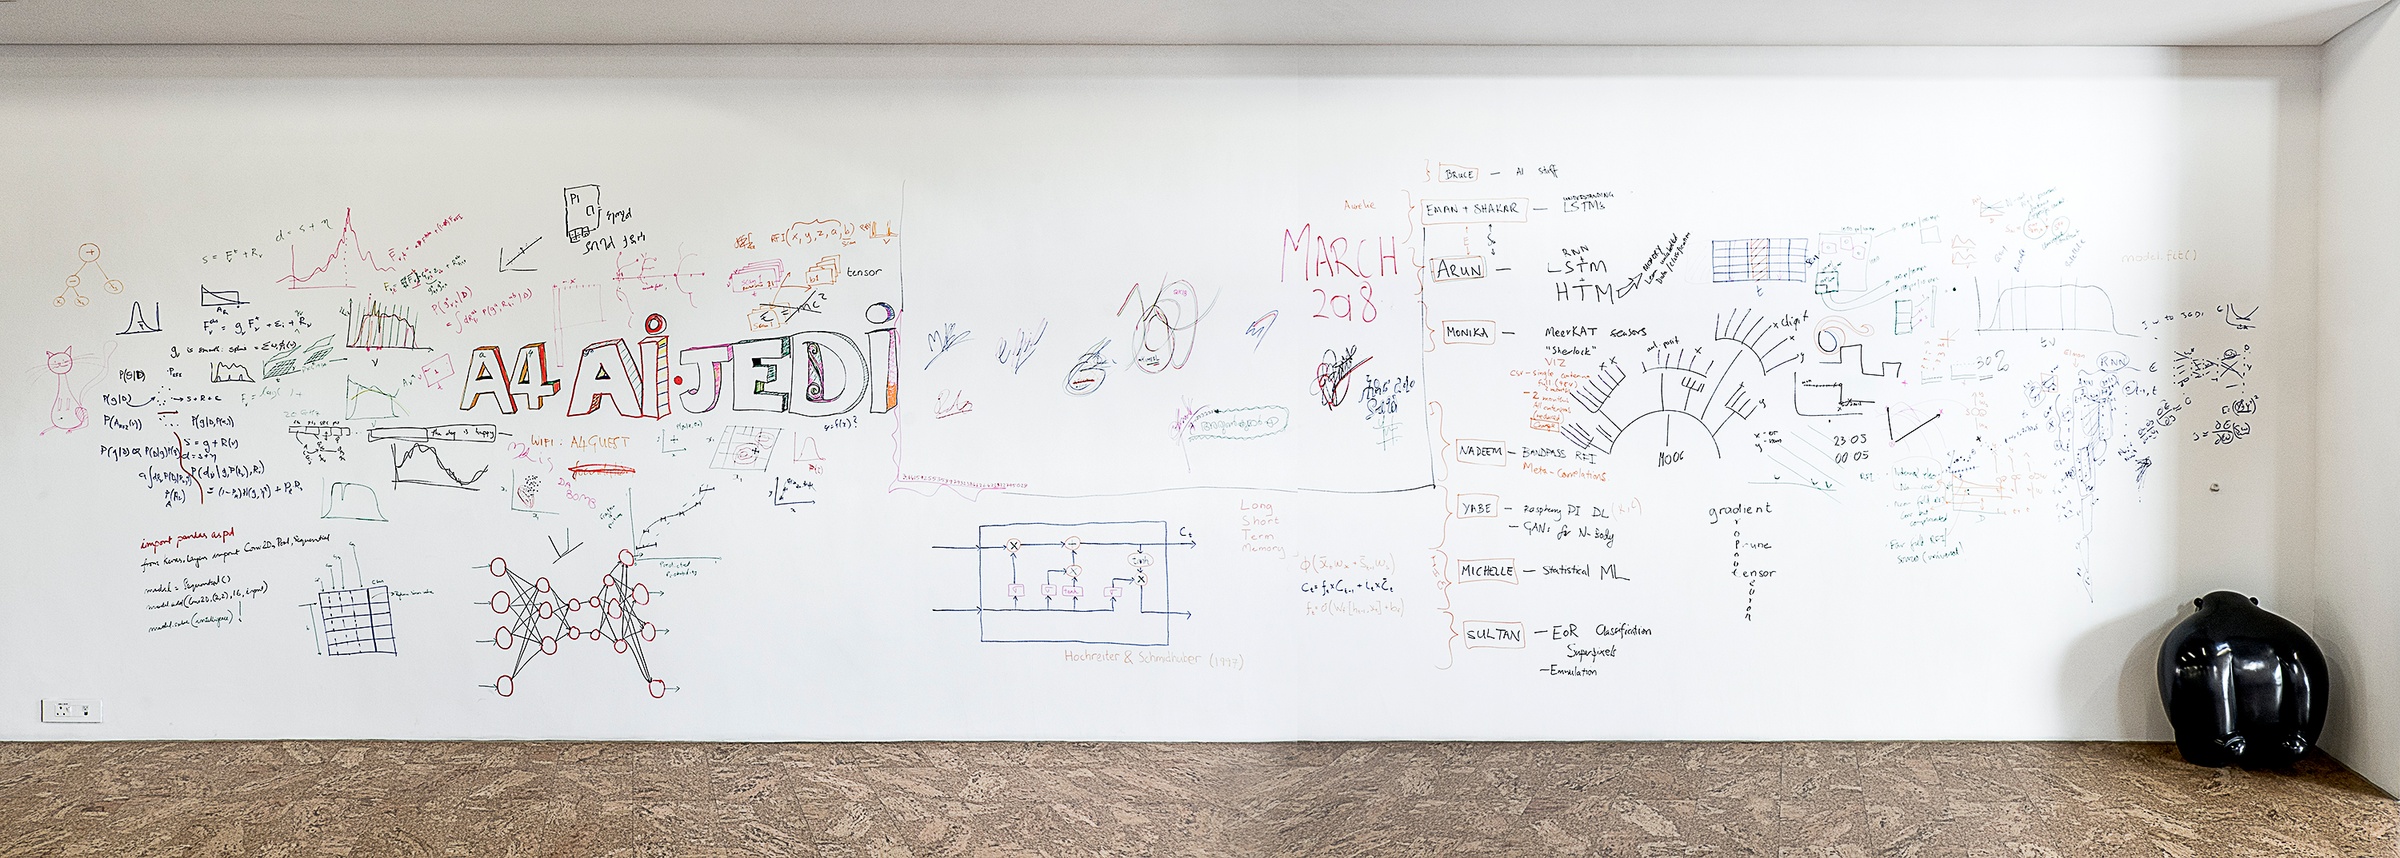 Event photograph from the ‘Artificial Intelligence JEDI’ workshop on A4’s top floor. A white wall with diagrams and formula made with variously coloured felt pen markers.
